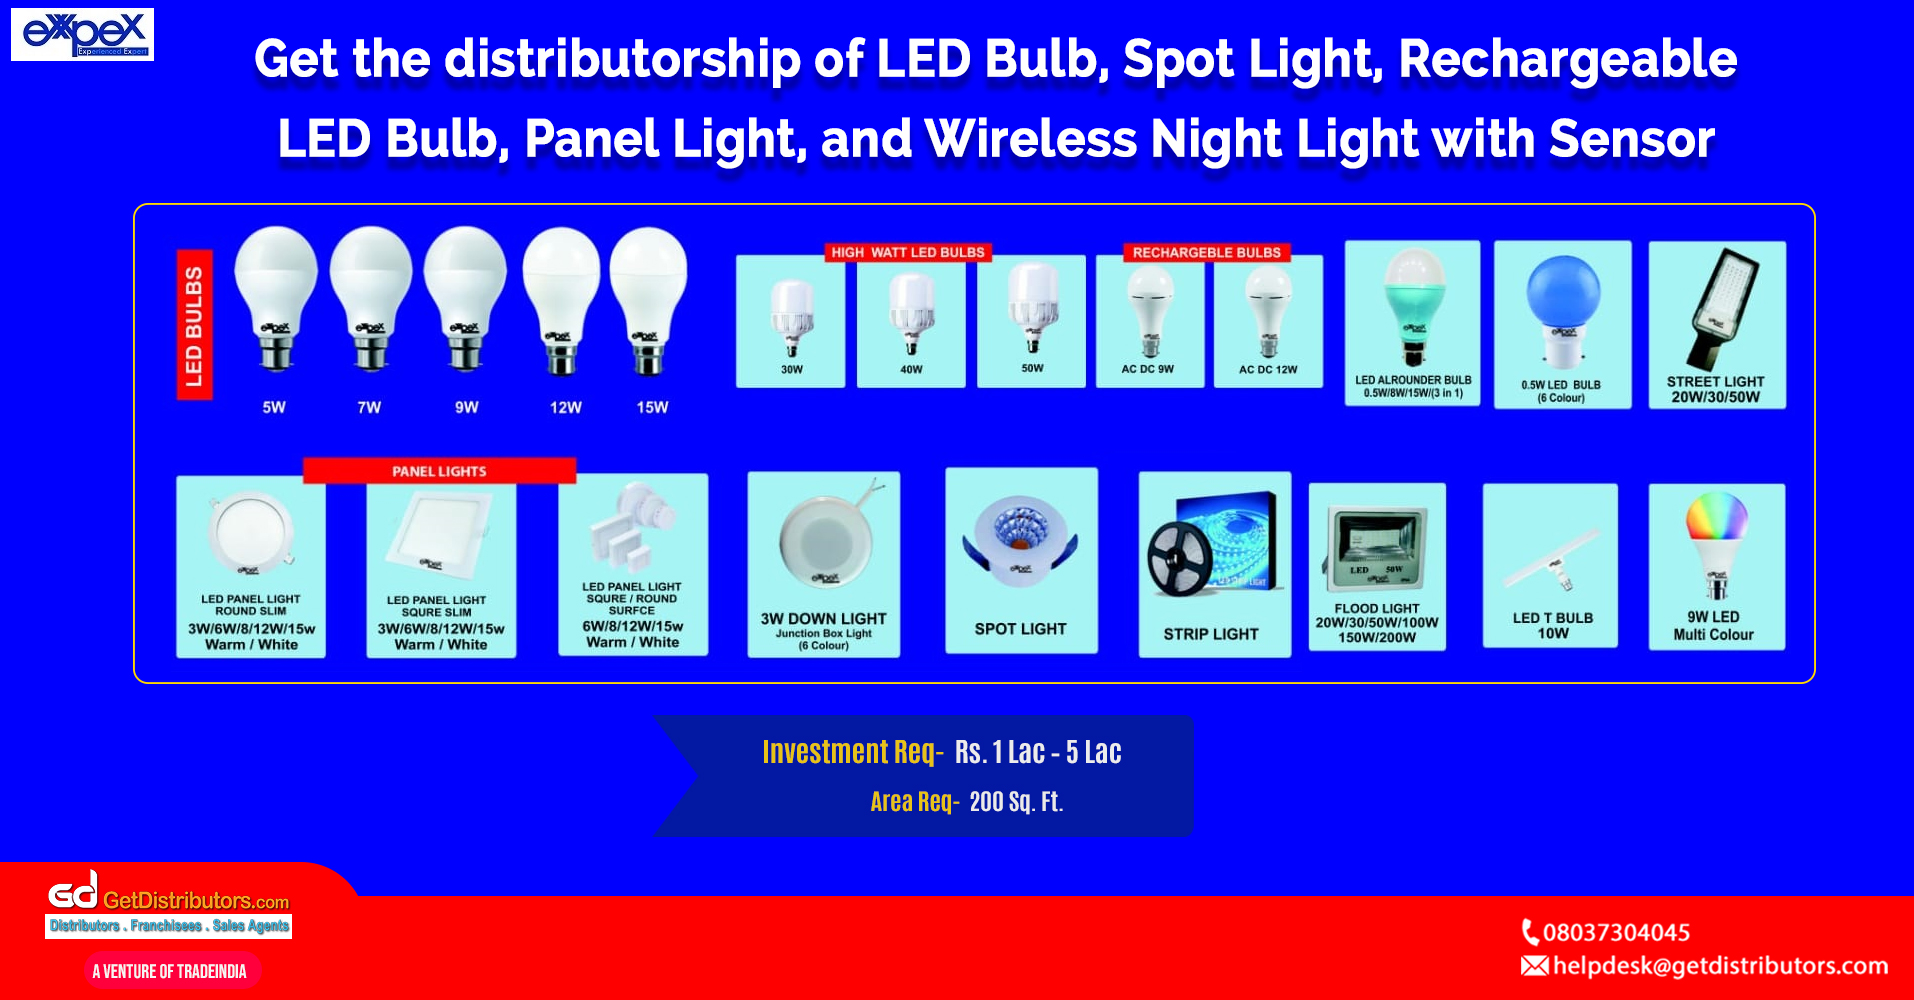 Take the distributorship of best-in-class LED lights and other products